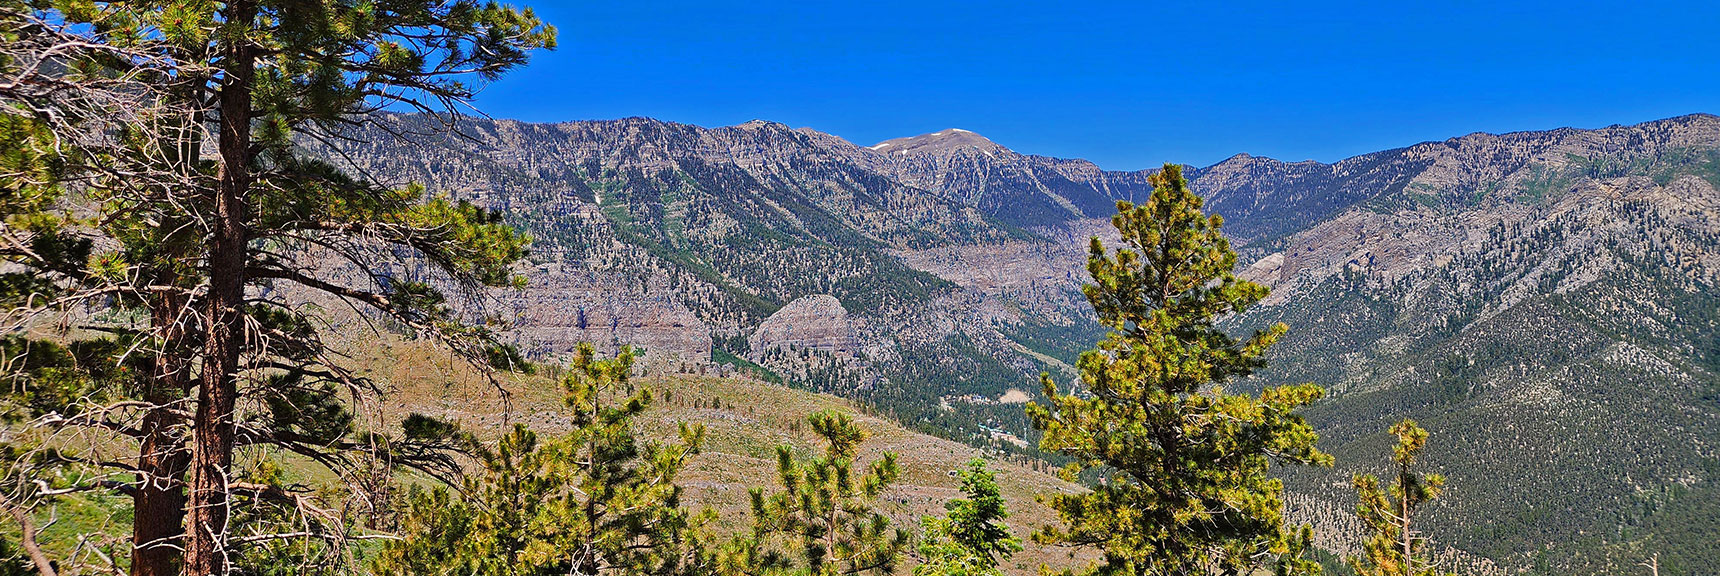 Charleston & Lee Peaks & Cathedral Rock Now Visible from Western Approach Ridge. | Fletcher Canyon to Harris Mountain Summit | Mt Charleston Wilderness, Nevada